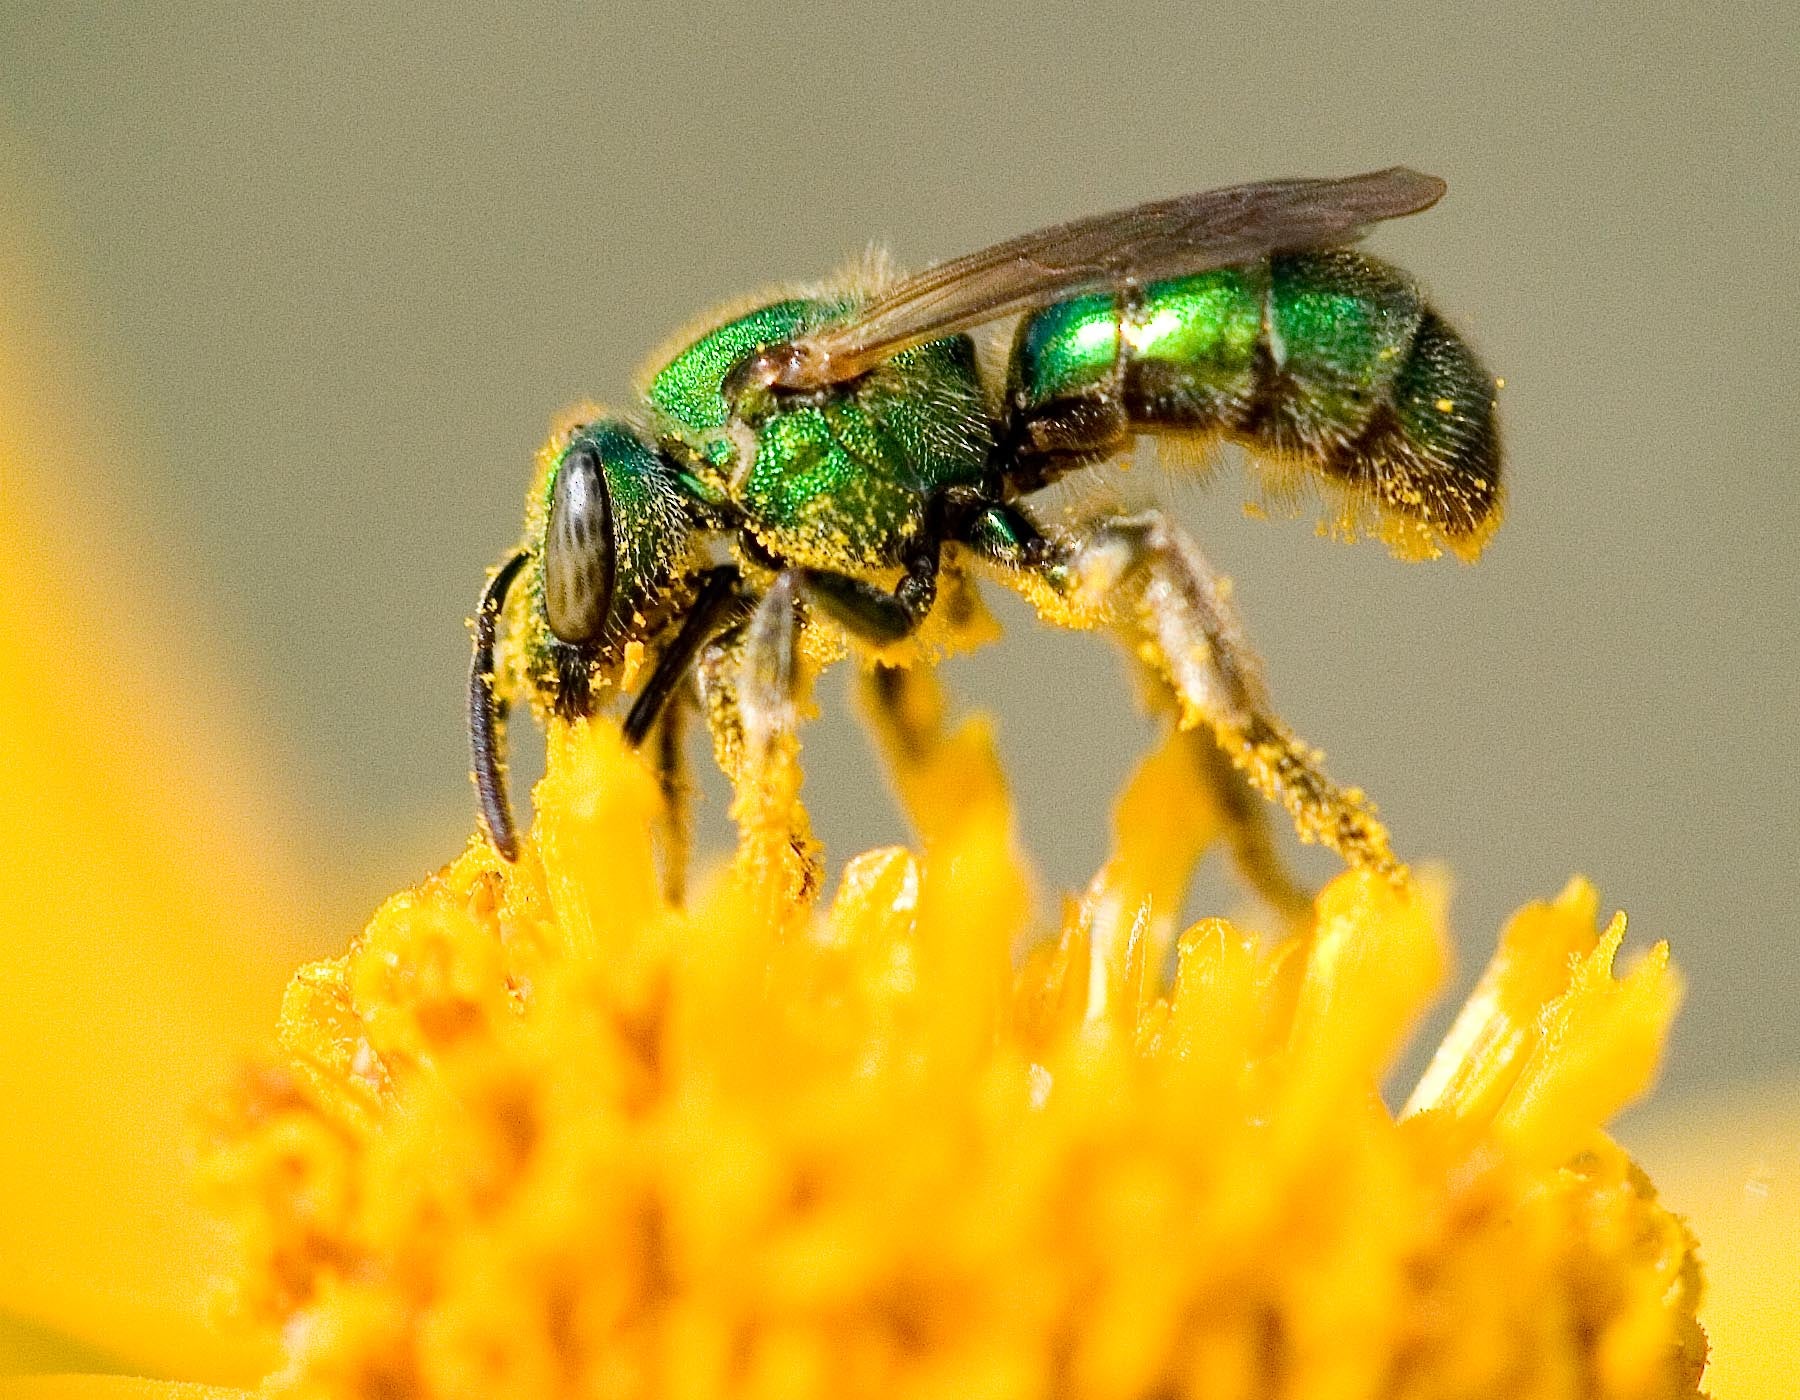 A green sweat bee collects pollen from a flower.